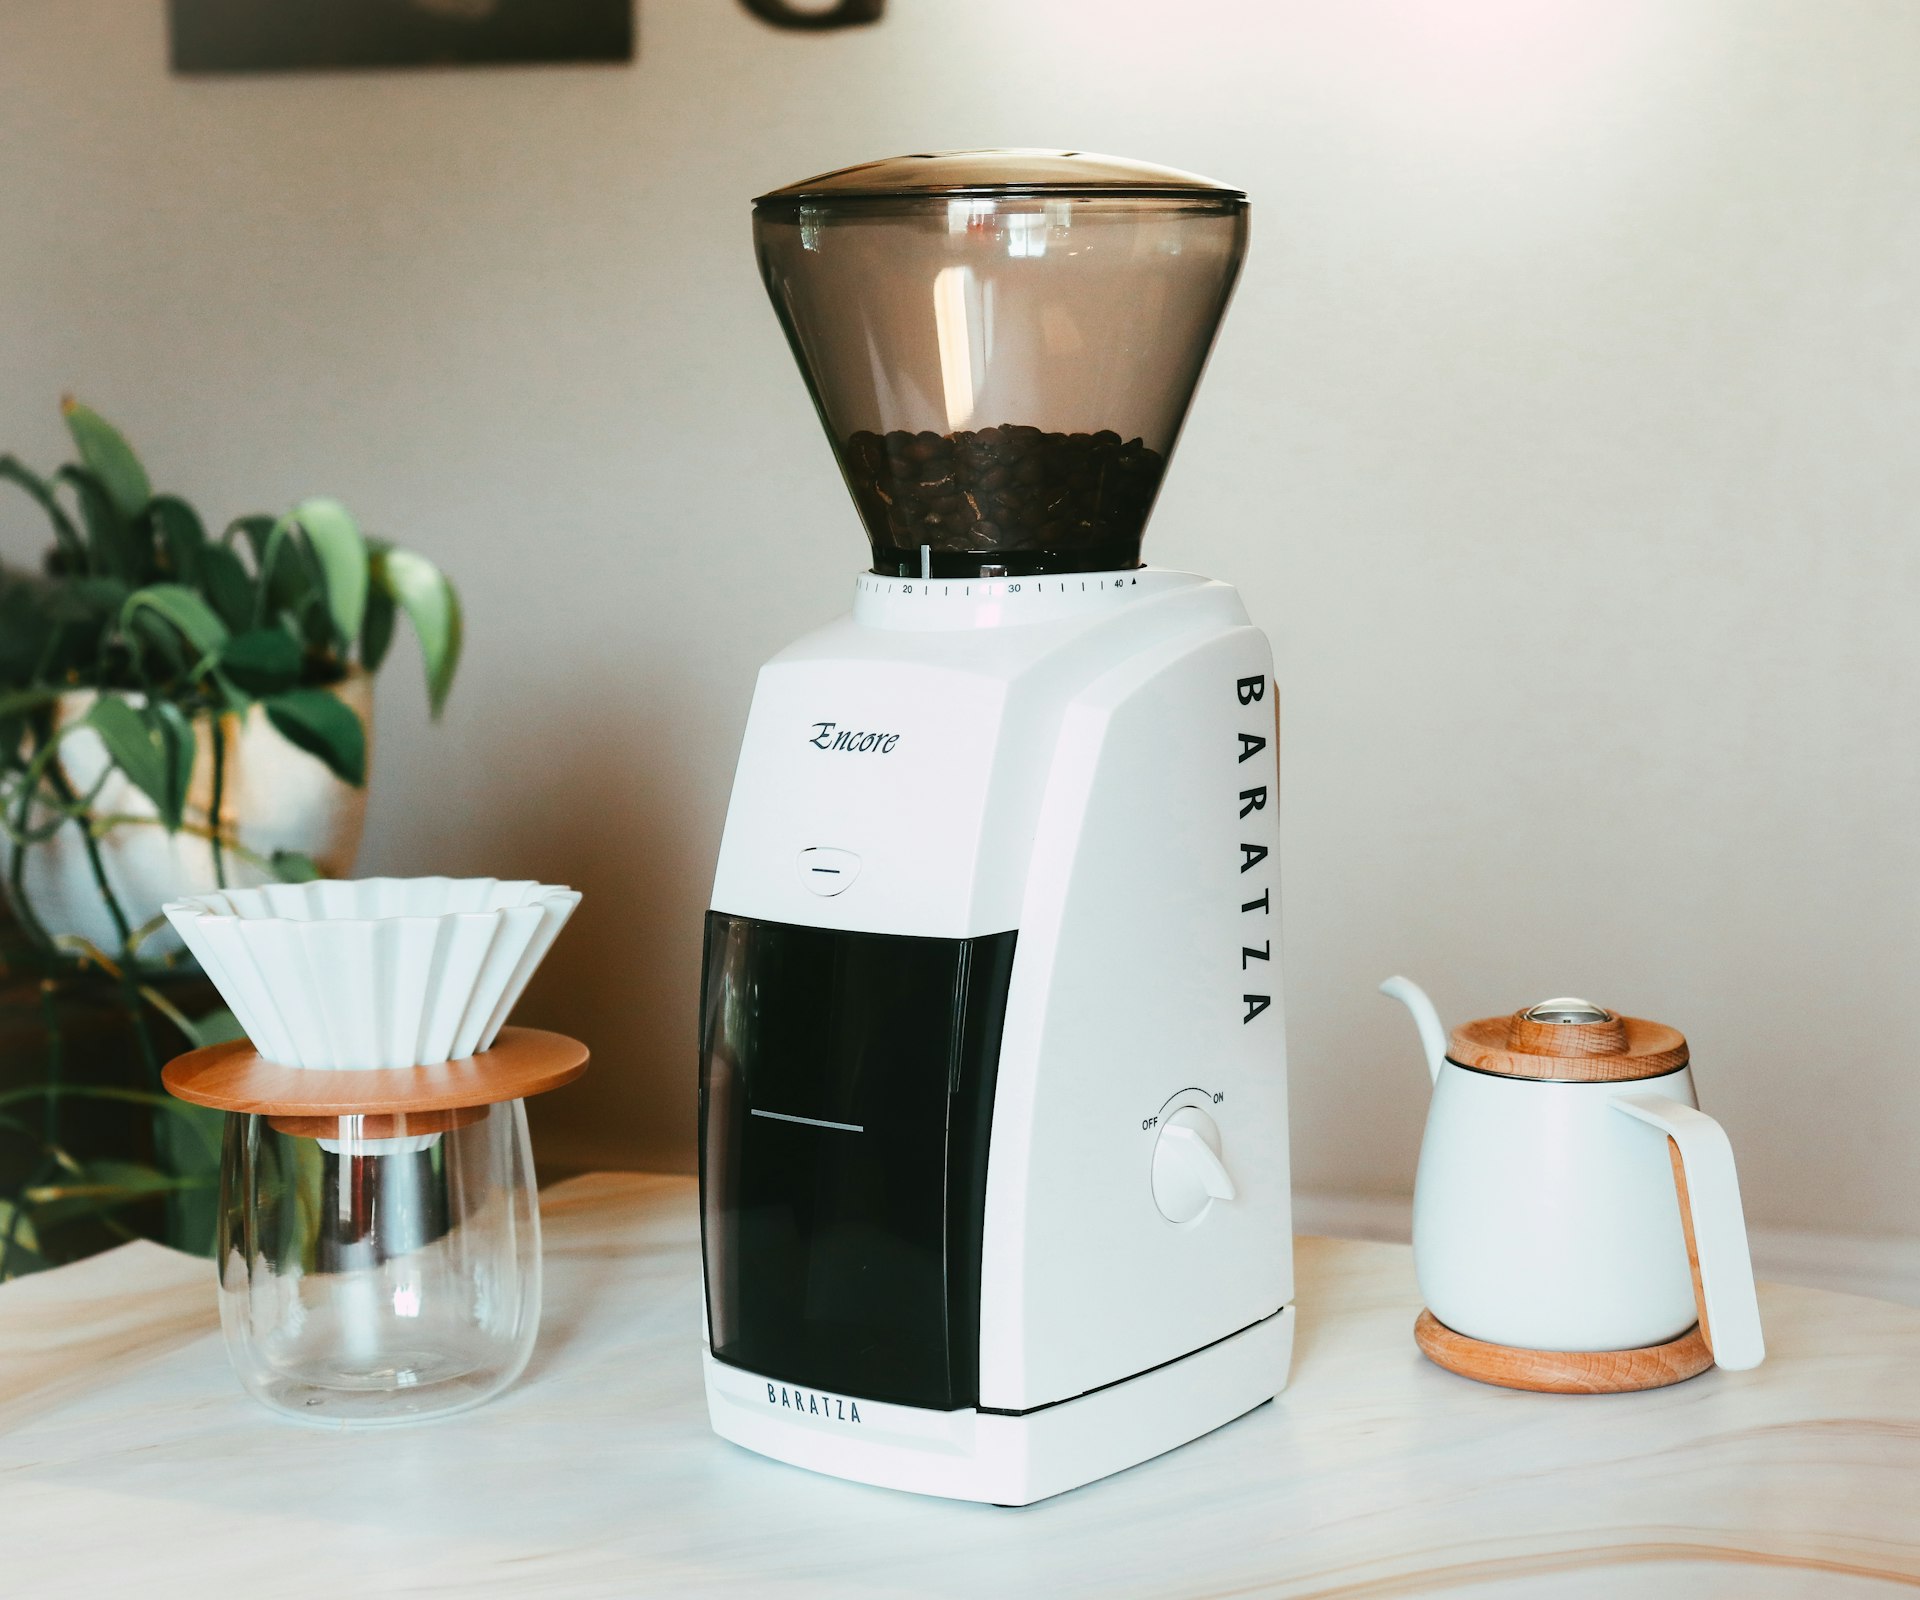 A product image of the Baratza Encore coffee bean grinder